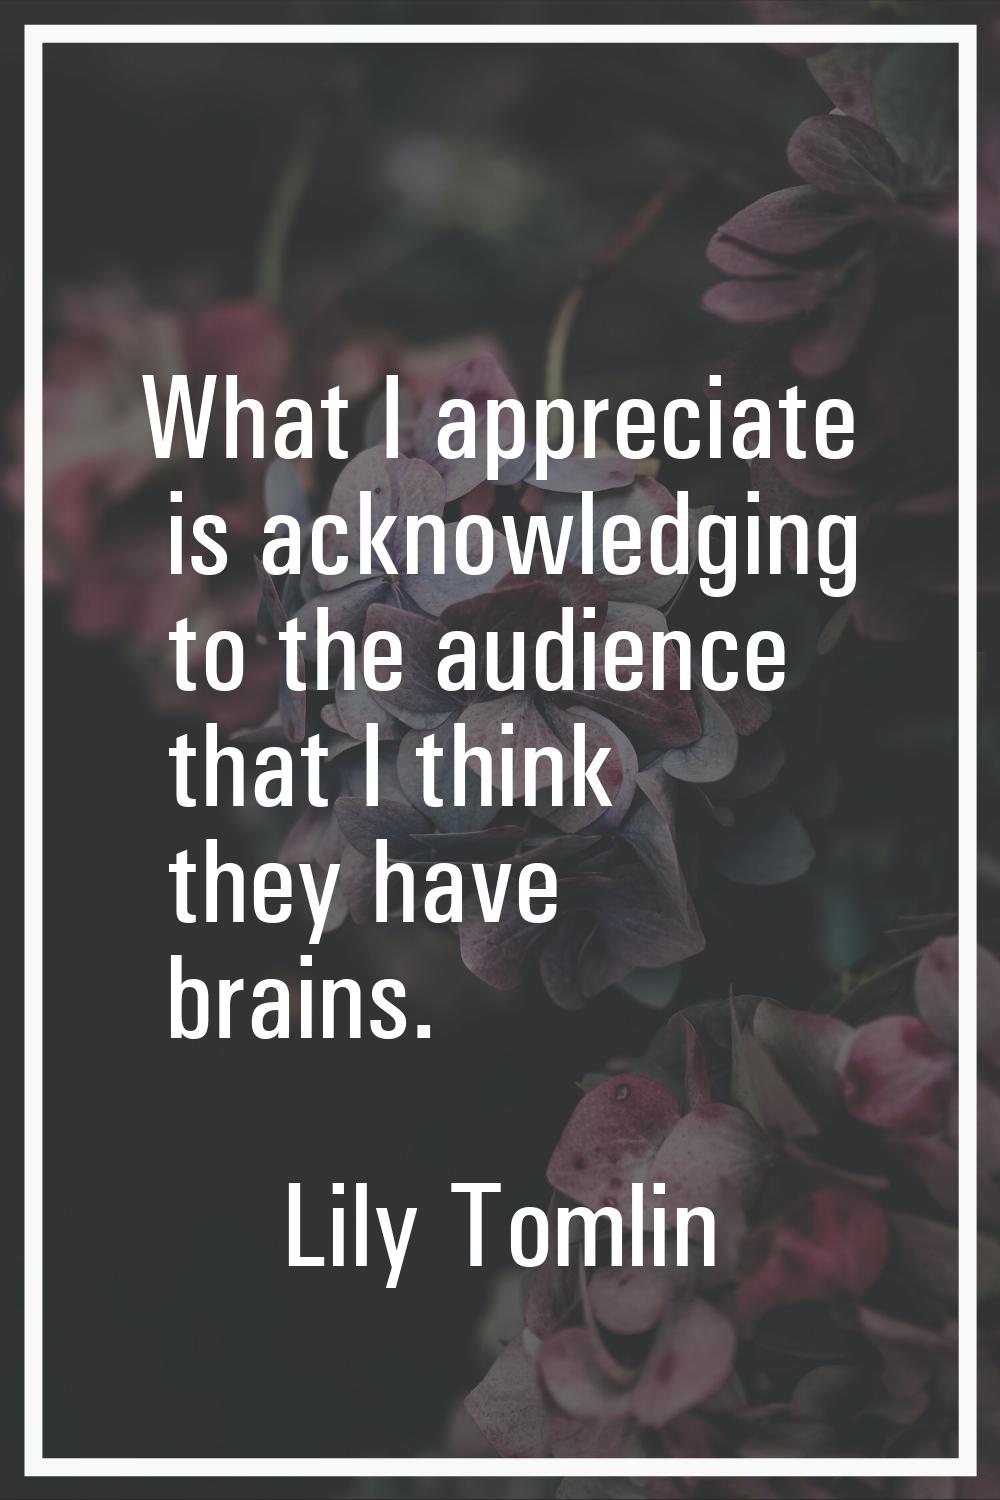 What I appreciate is acknowledging to the audience that I think they have brains.